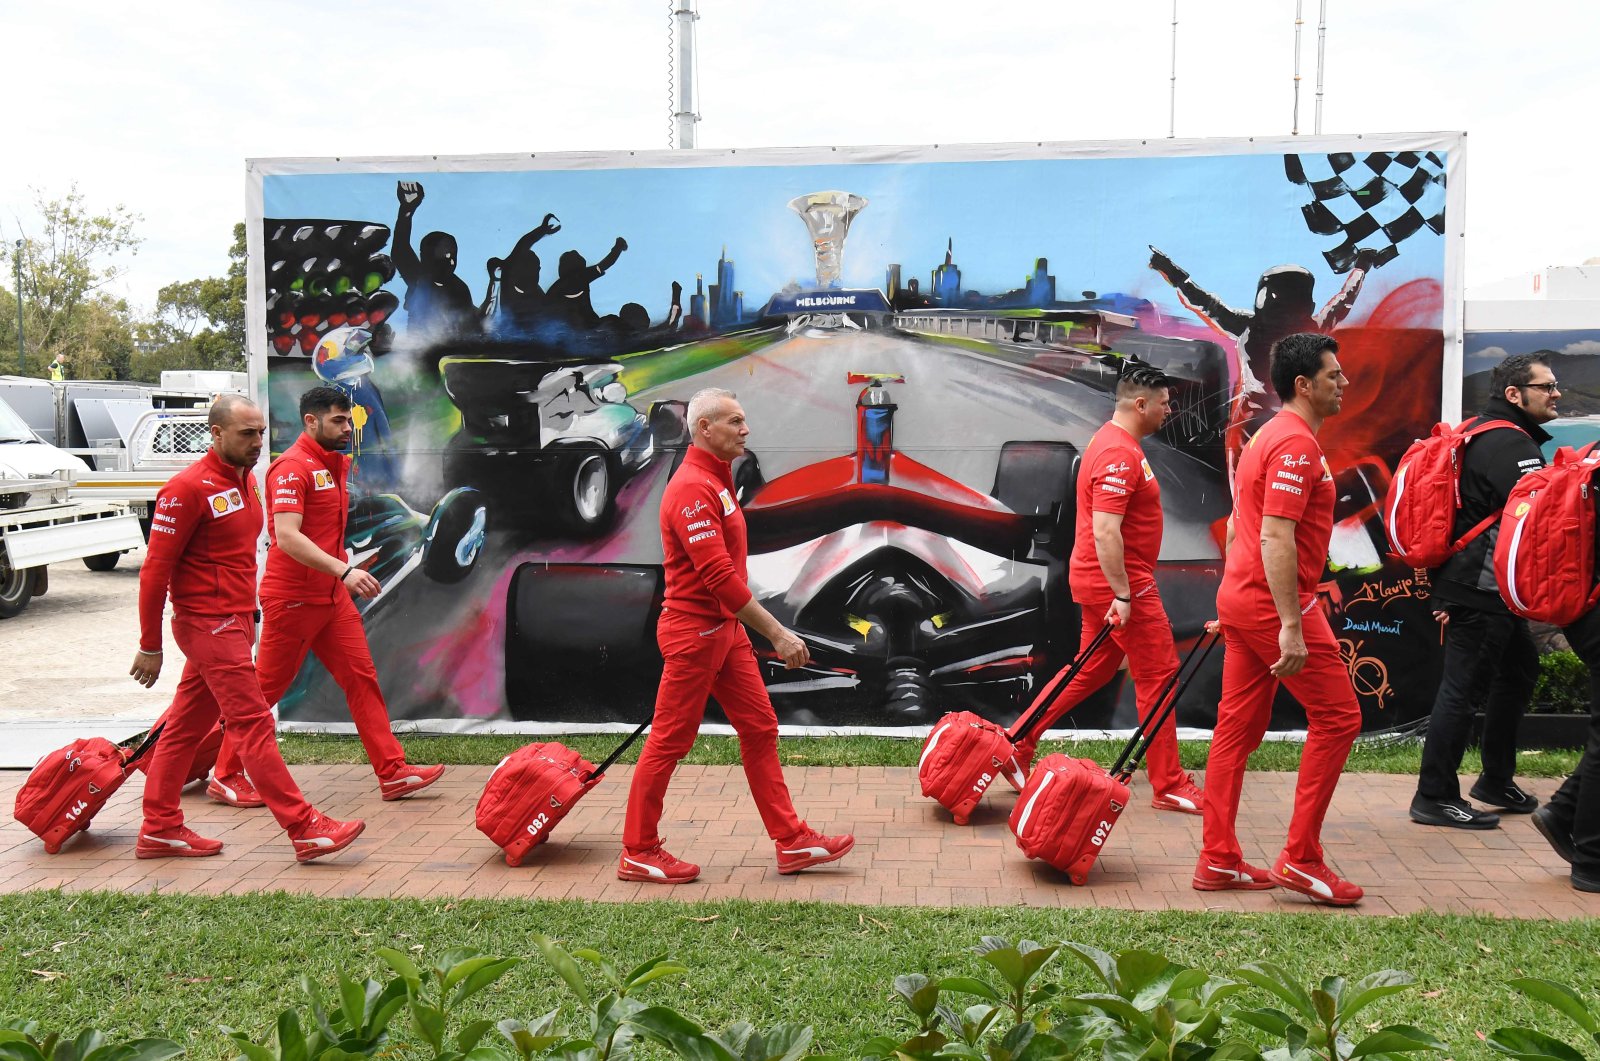 Members of the Ferrari team arrive to pack up their equipment after the Australian Grand Prix was canceled, Melbourne, March 13, 2020. (AFP Photo)